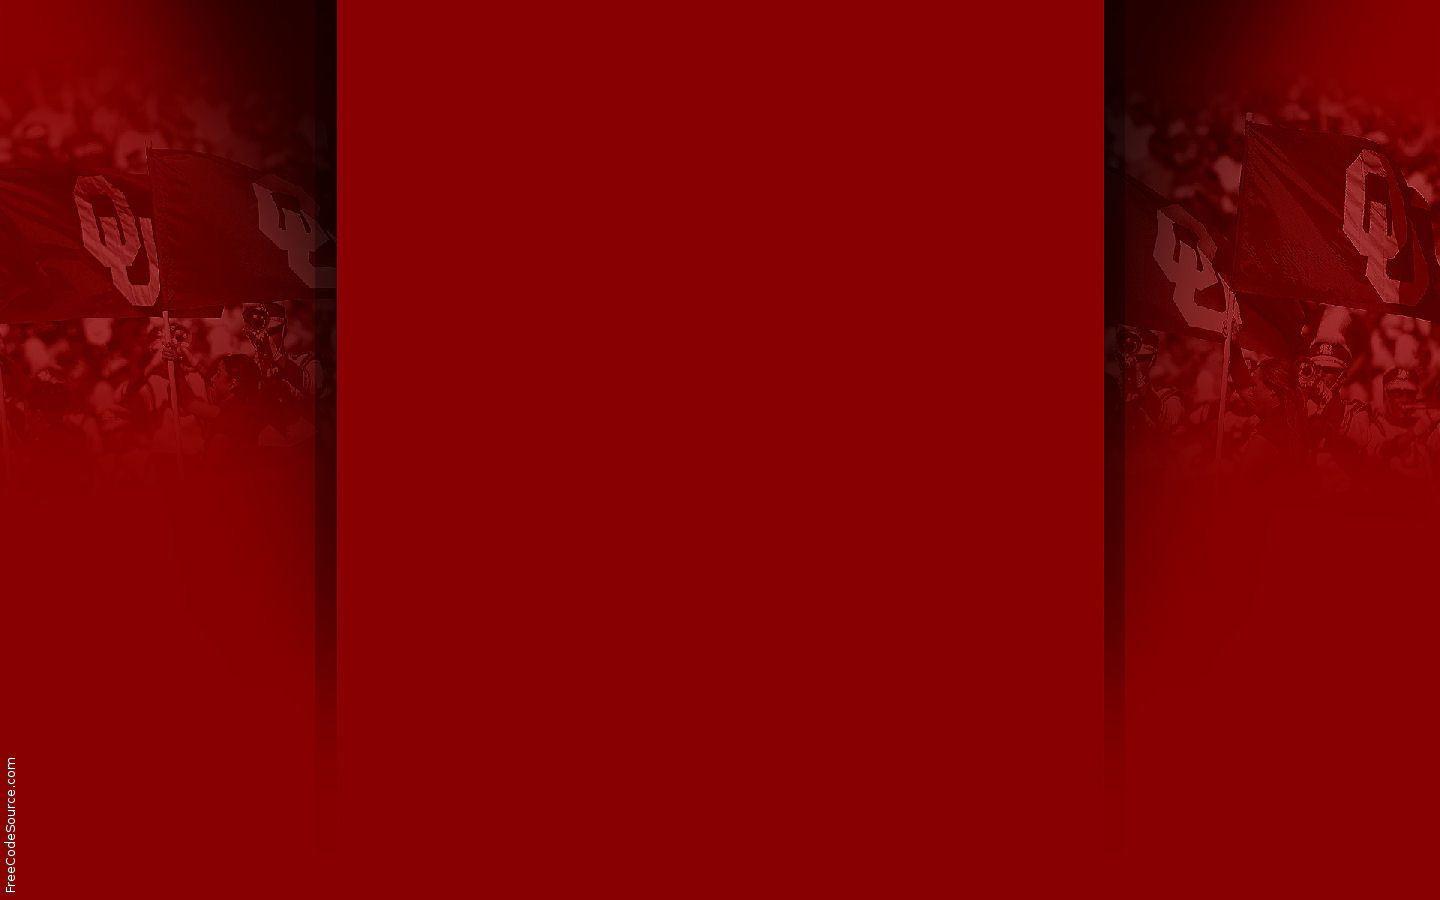 Free Oklahoma University Sooners Background For PowerPoint